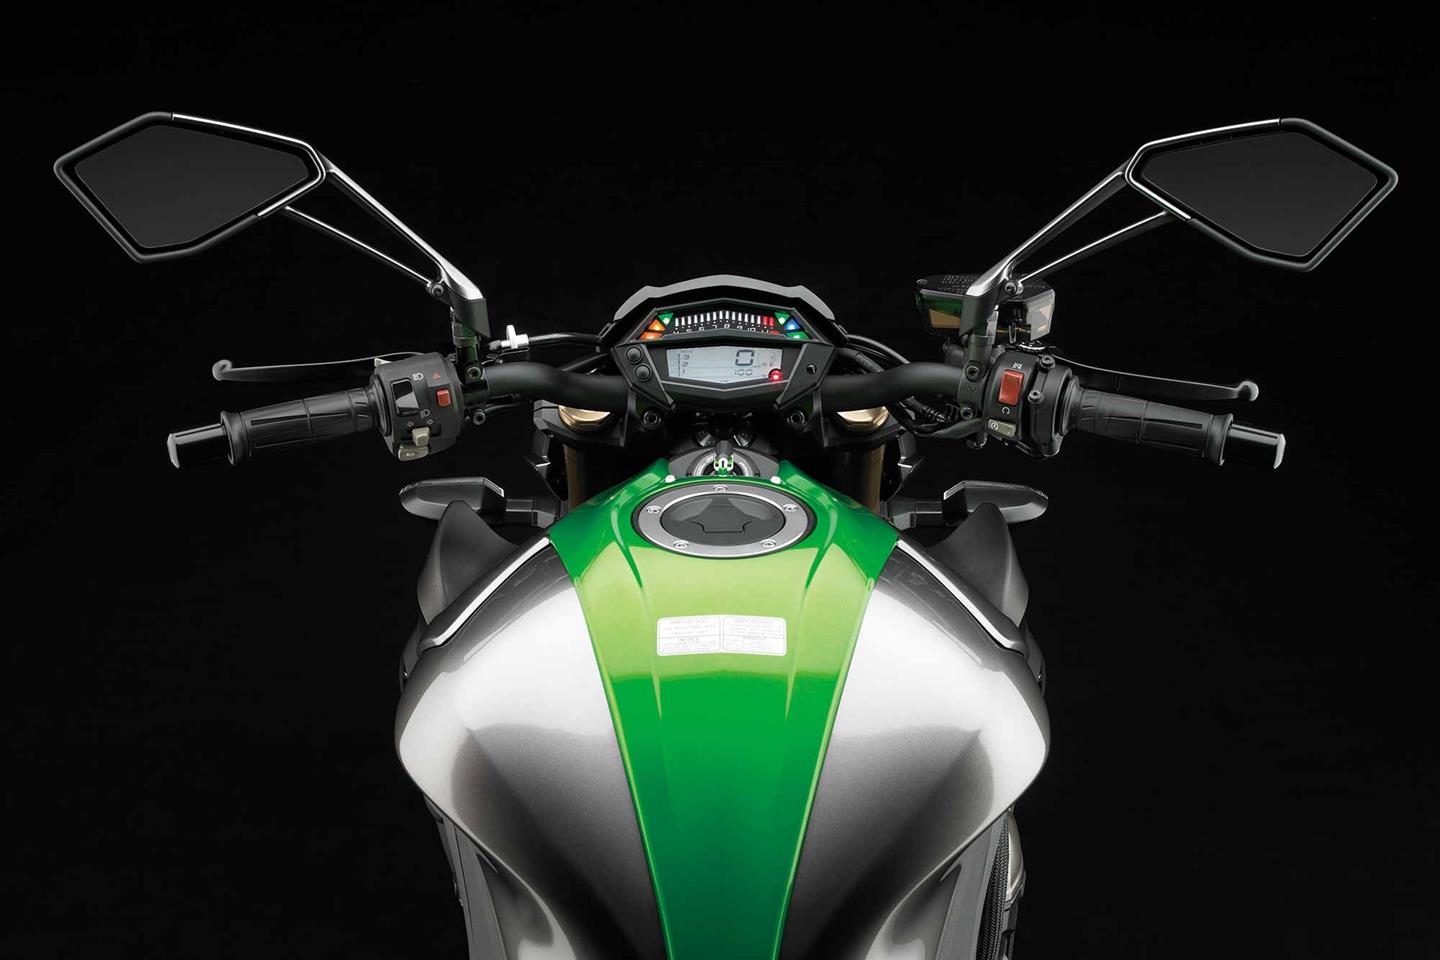 2014-2017 Kawasaki Z1000 Buyers Guide | Speed, Specs & Prices